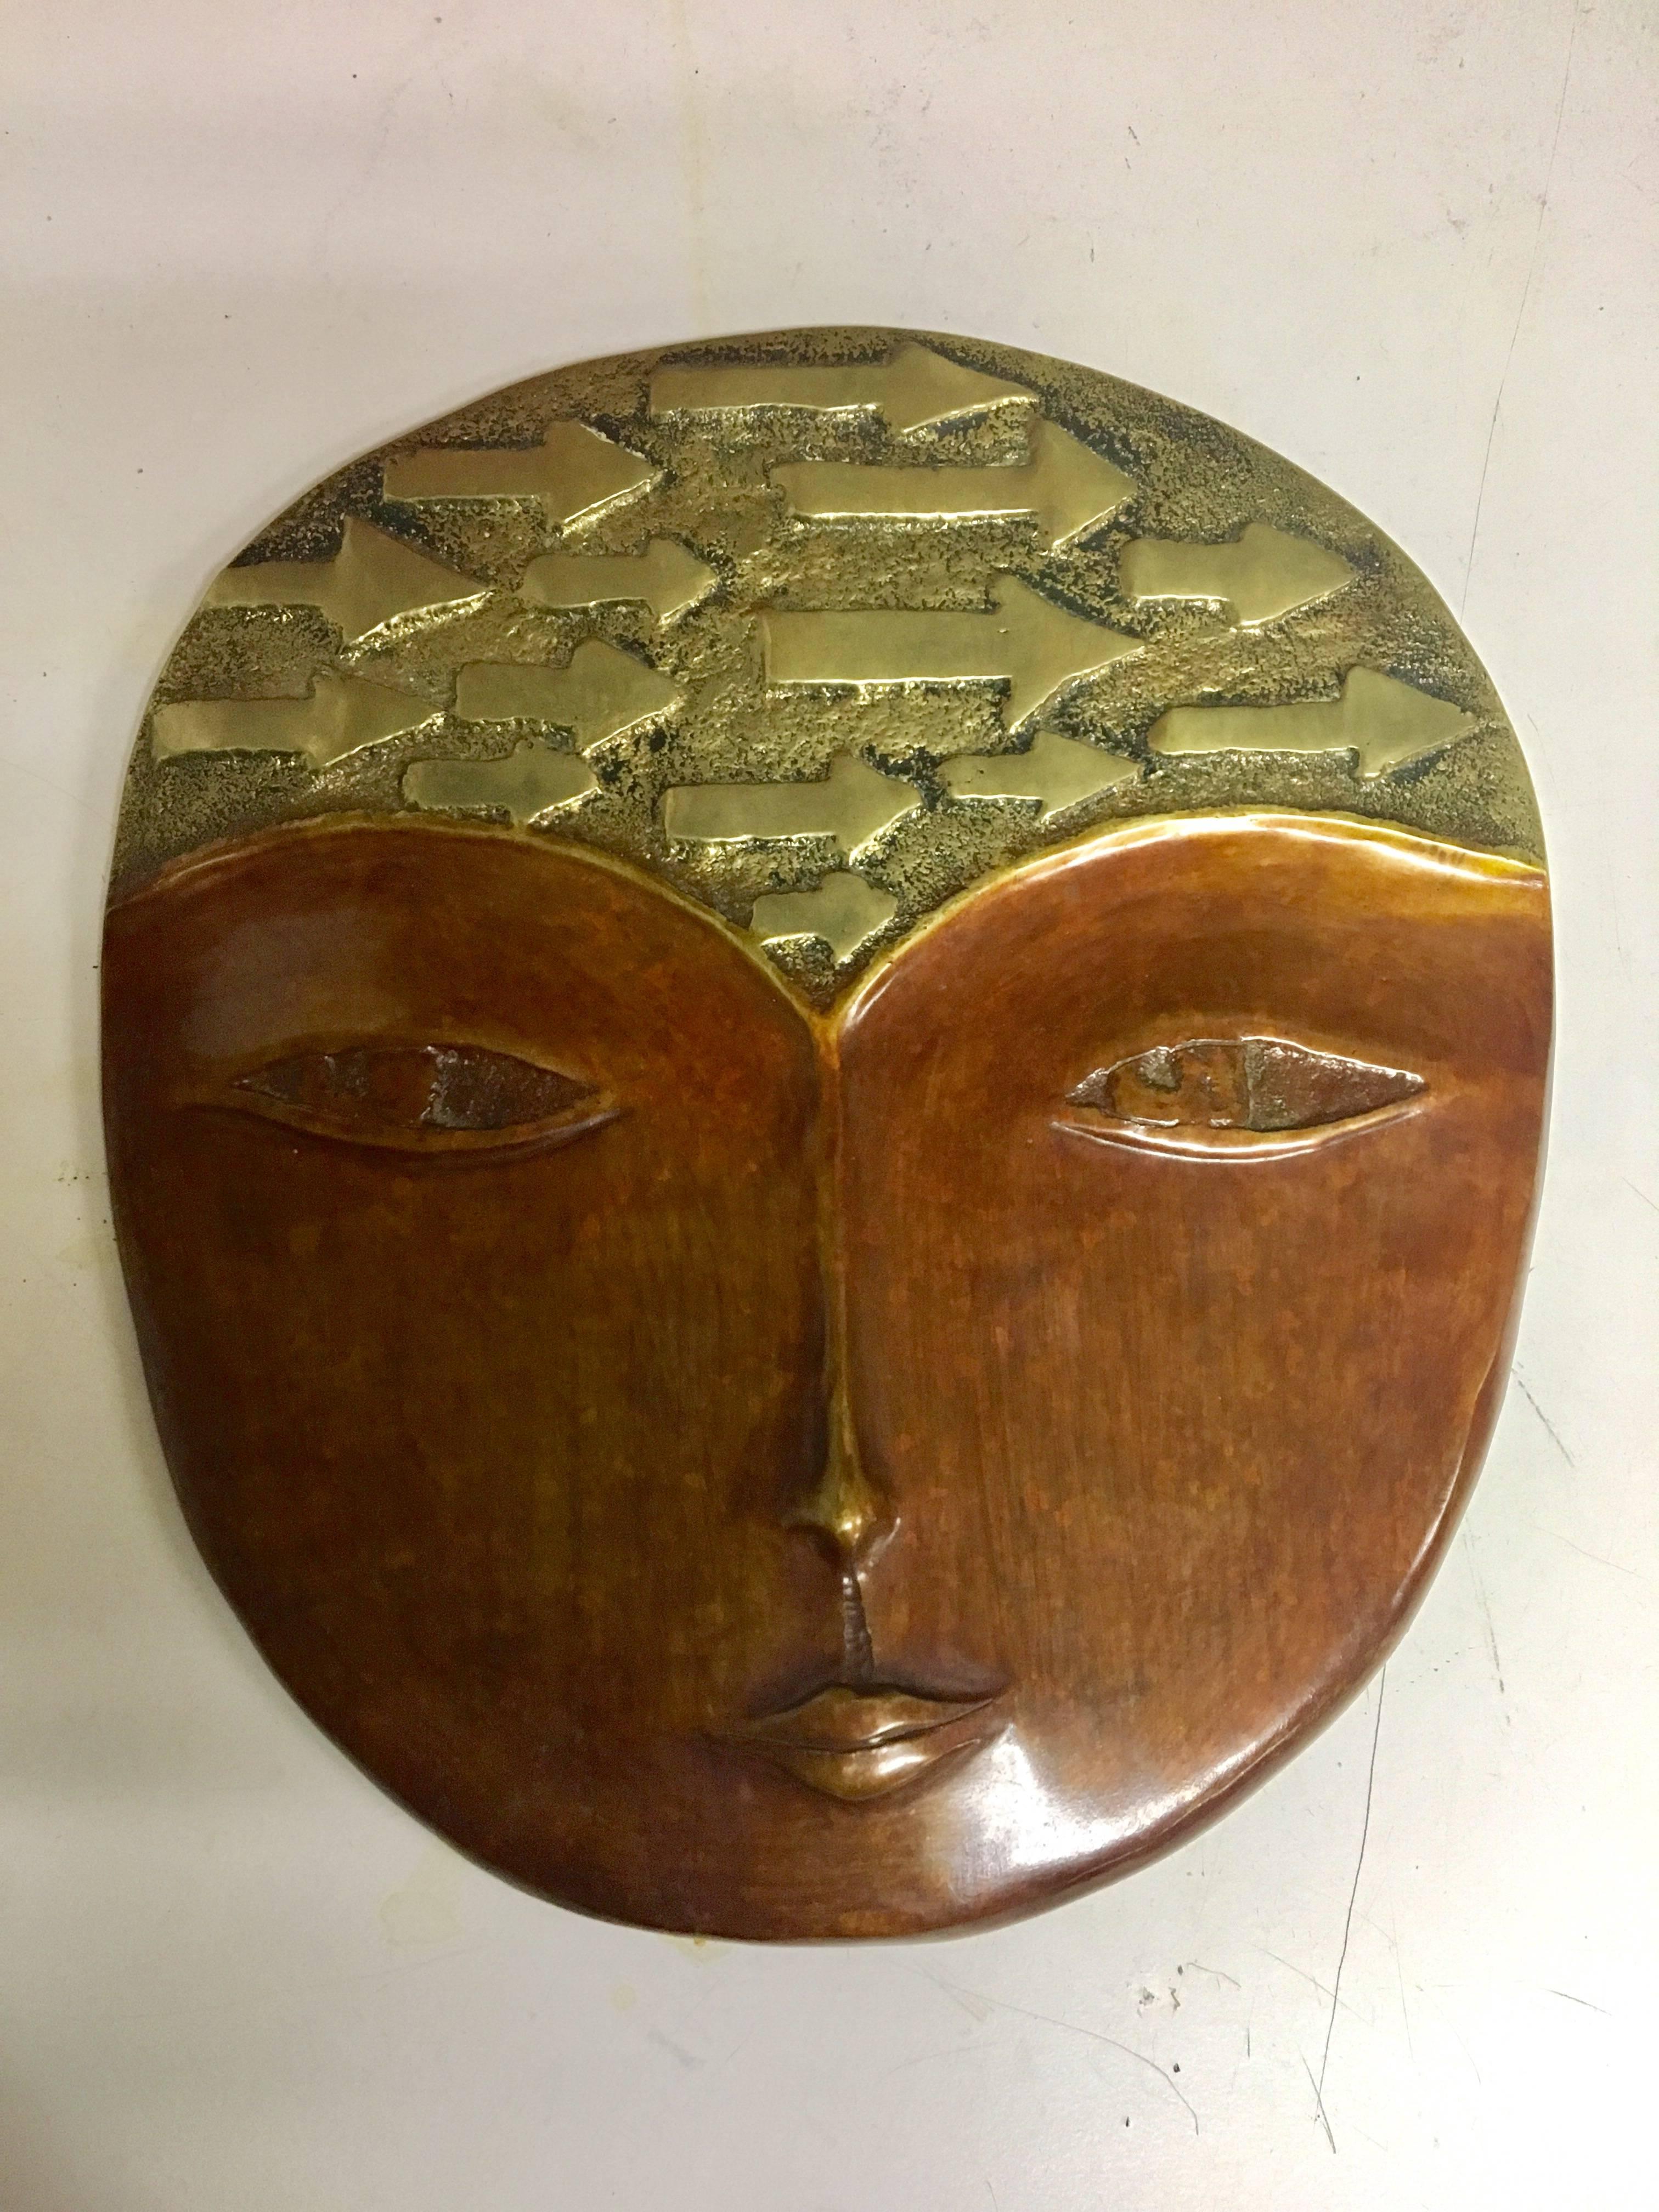 Contemporary artist face mask by Costa Rican artist A. M. Fage signed and dated (1992) in solid bronze. High quality, two-toned piece.